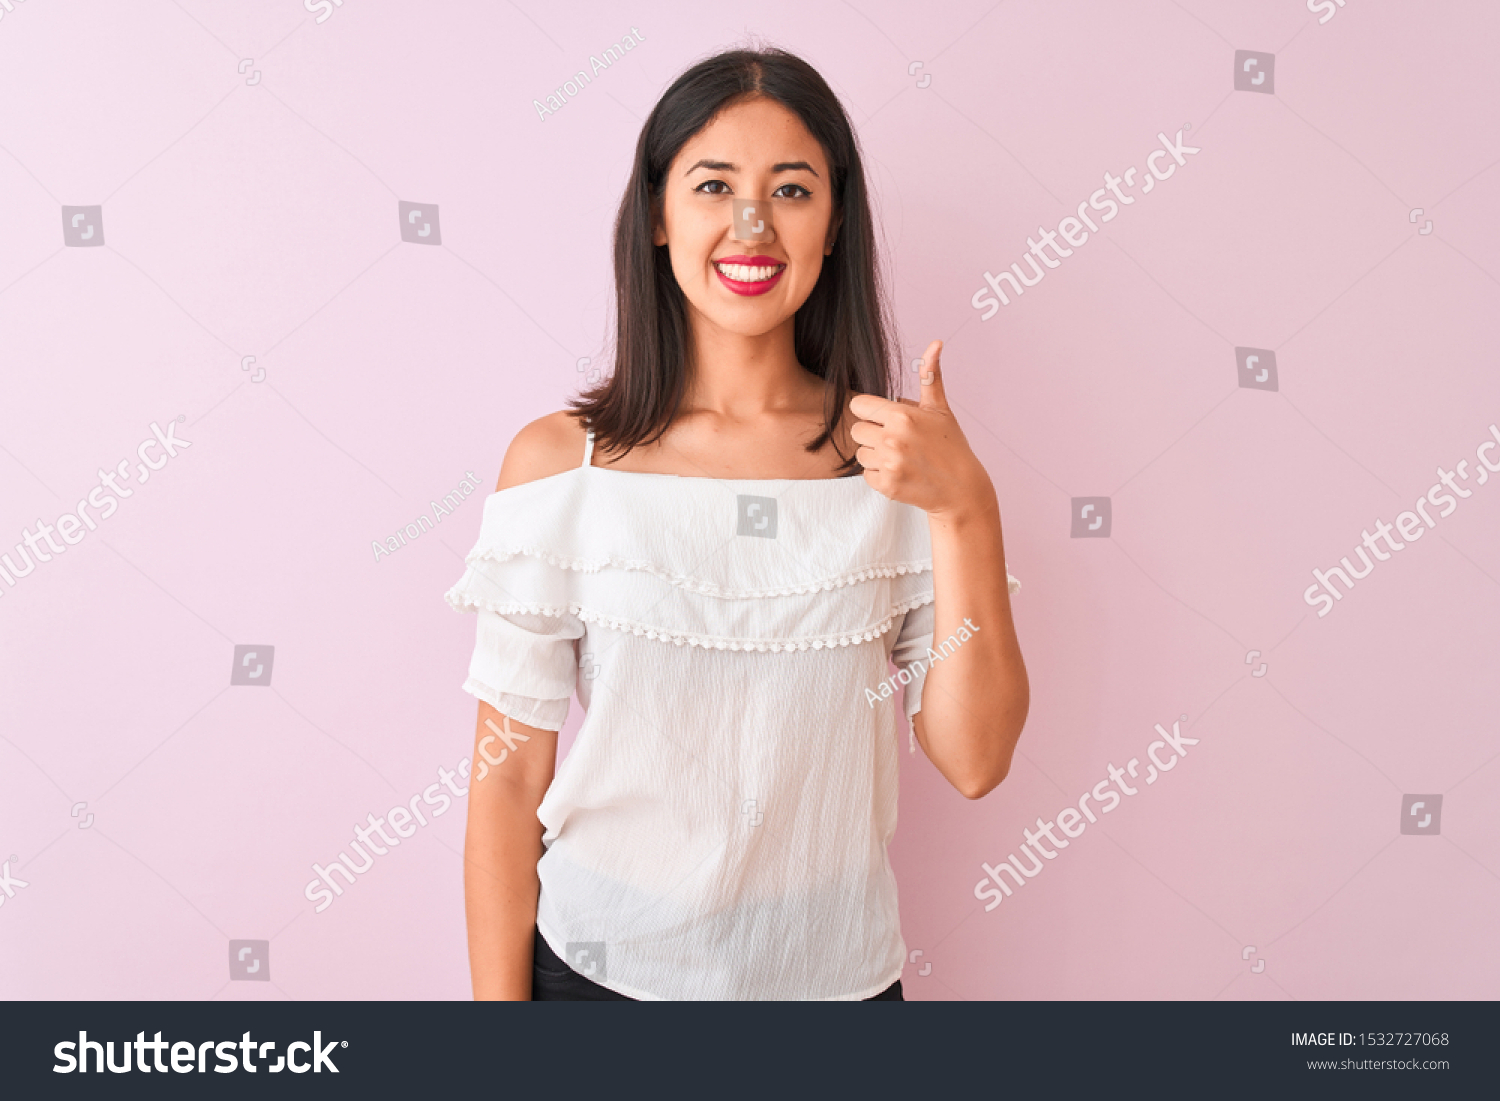 Beautiful chinese woman wearing white t-shirt standing over isolated pink background doing happy thumbs up gesture with hand. Approving expression looking at the camera showing success. #1532727068